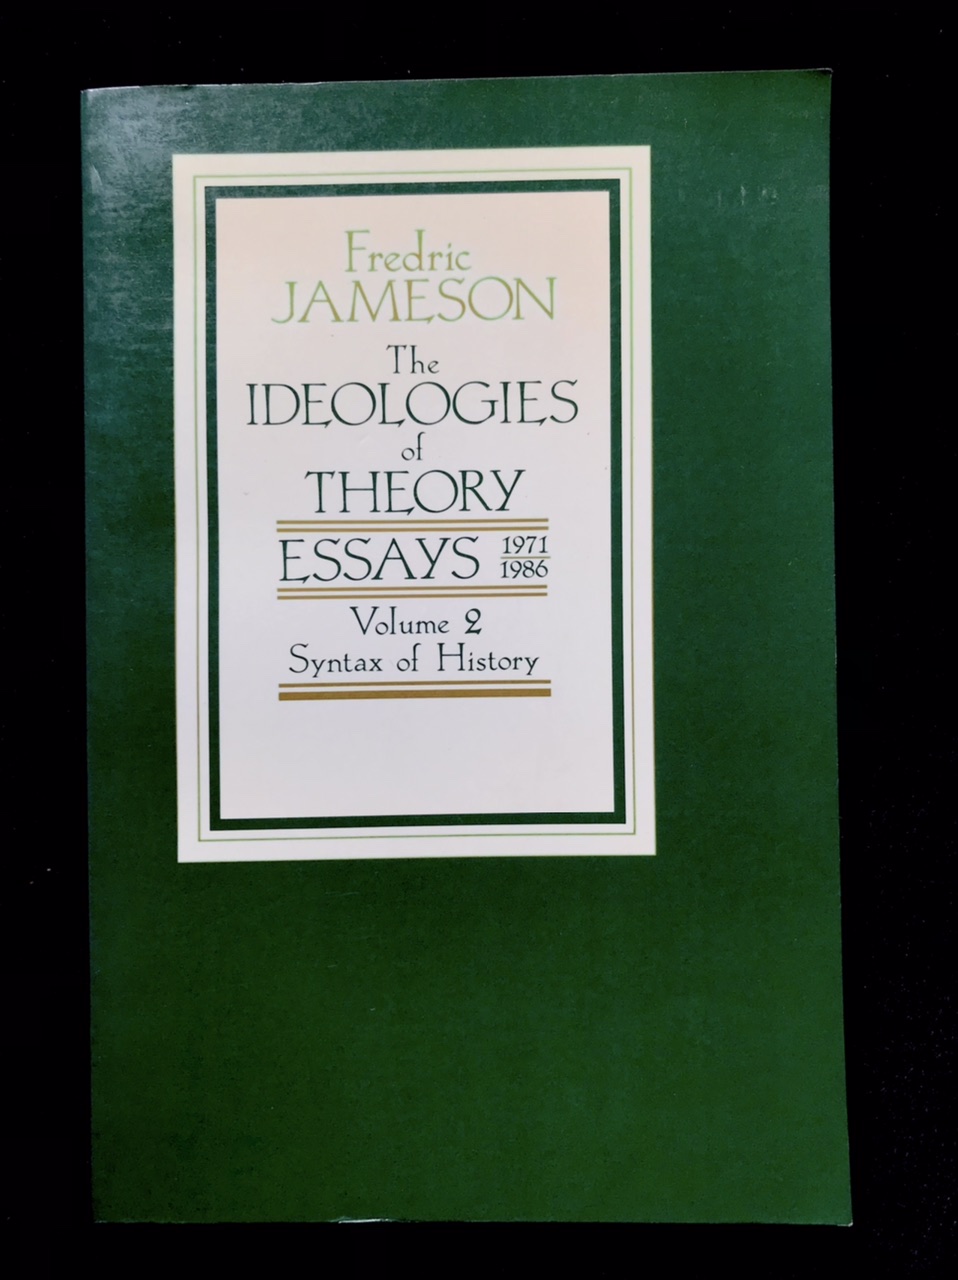 The Ideologies of Theory Essays 1971-1986 Vol 2 Syntax of History by F. Jameson